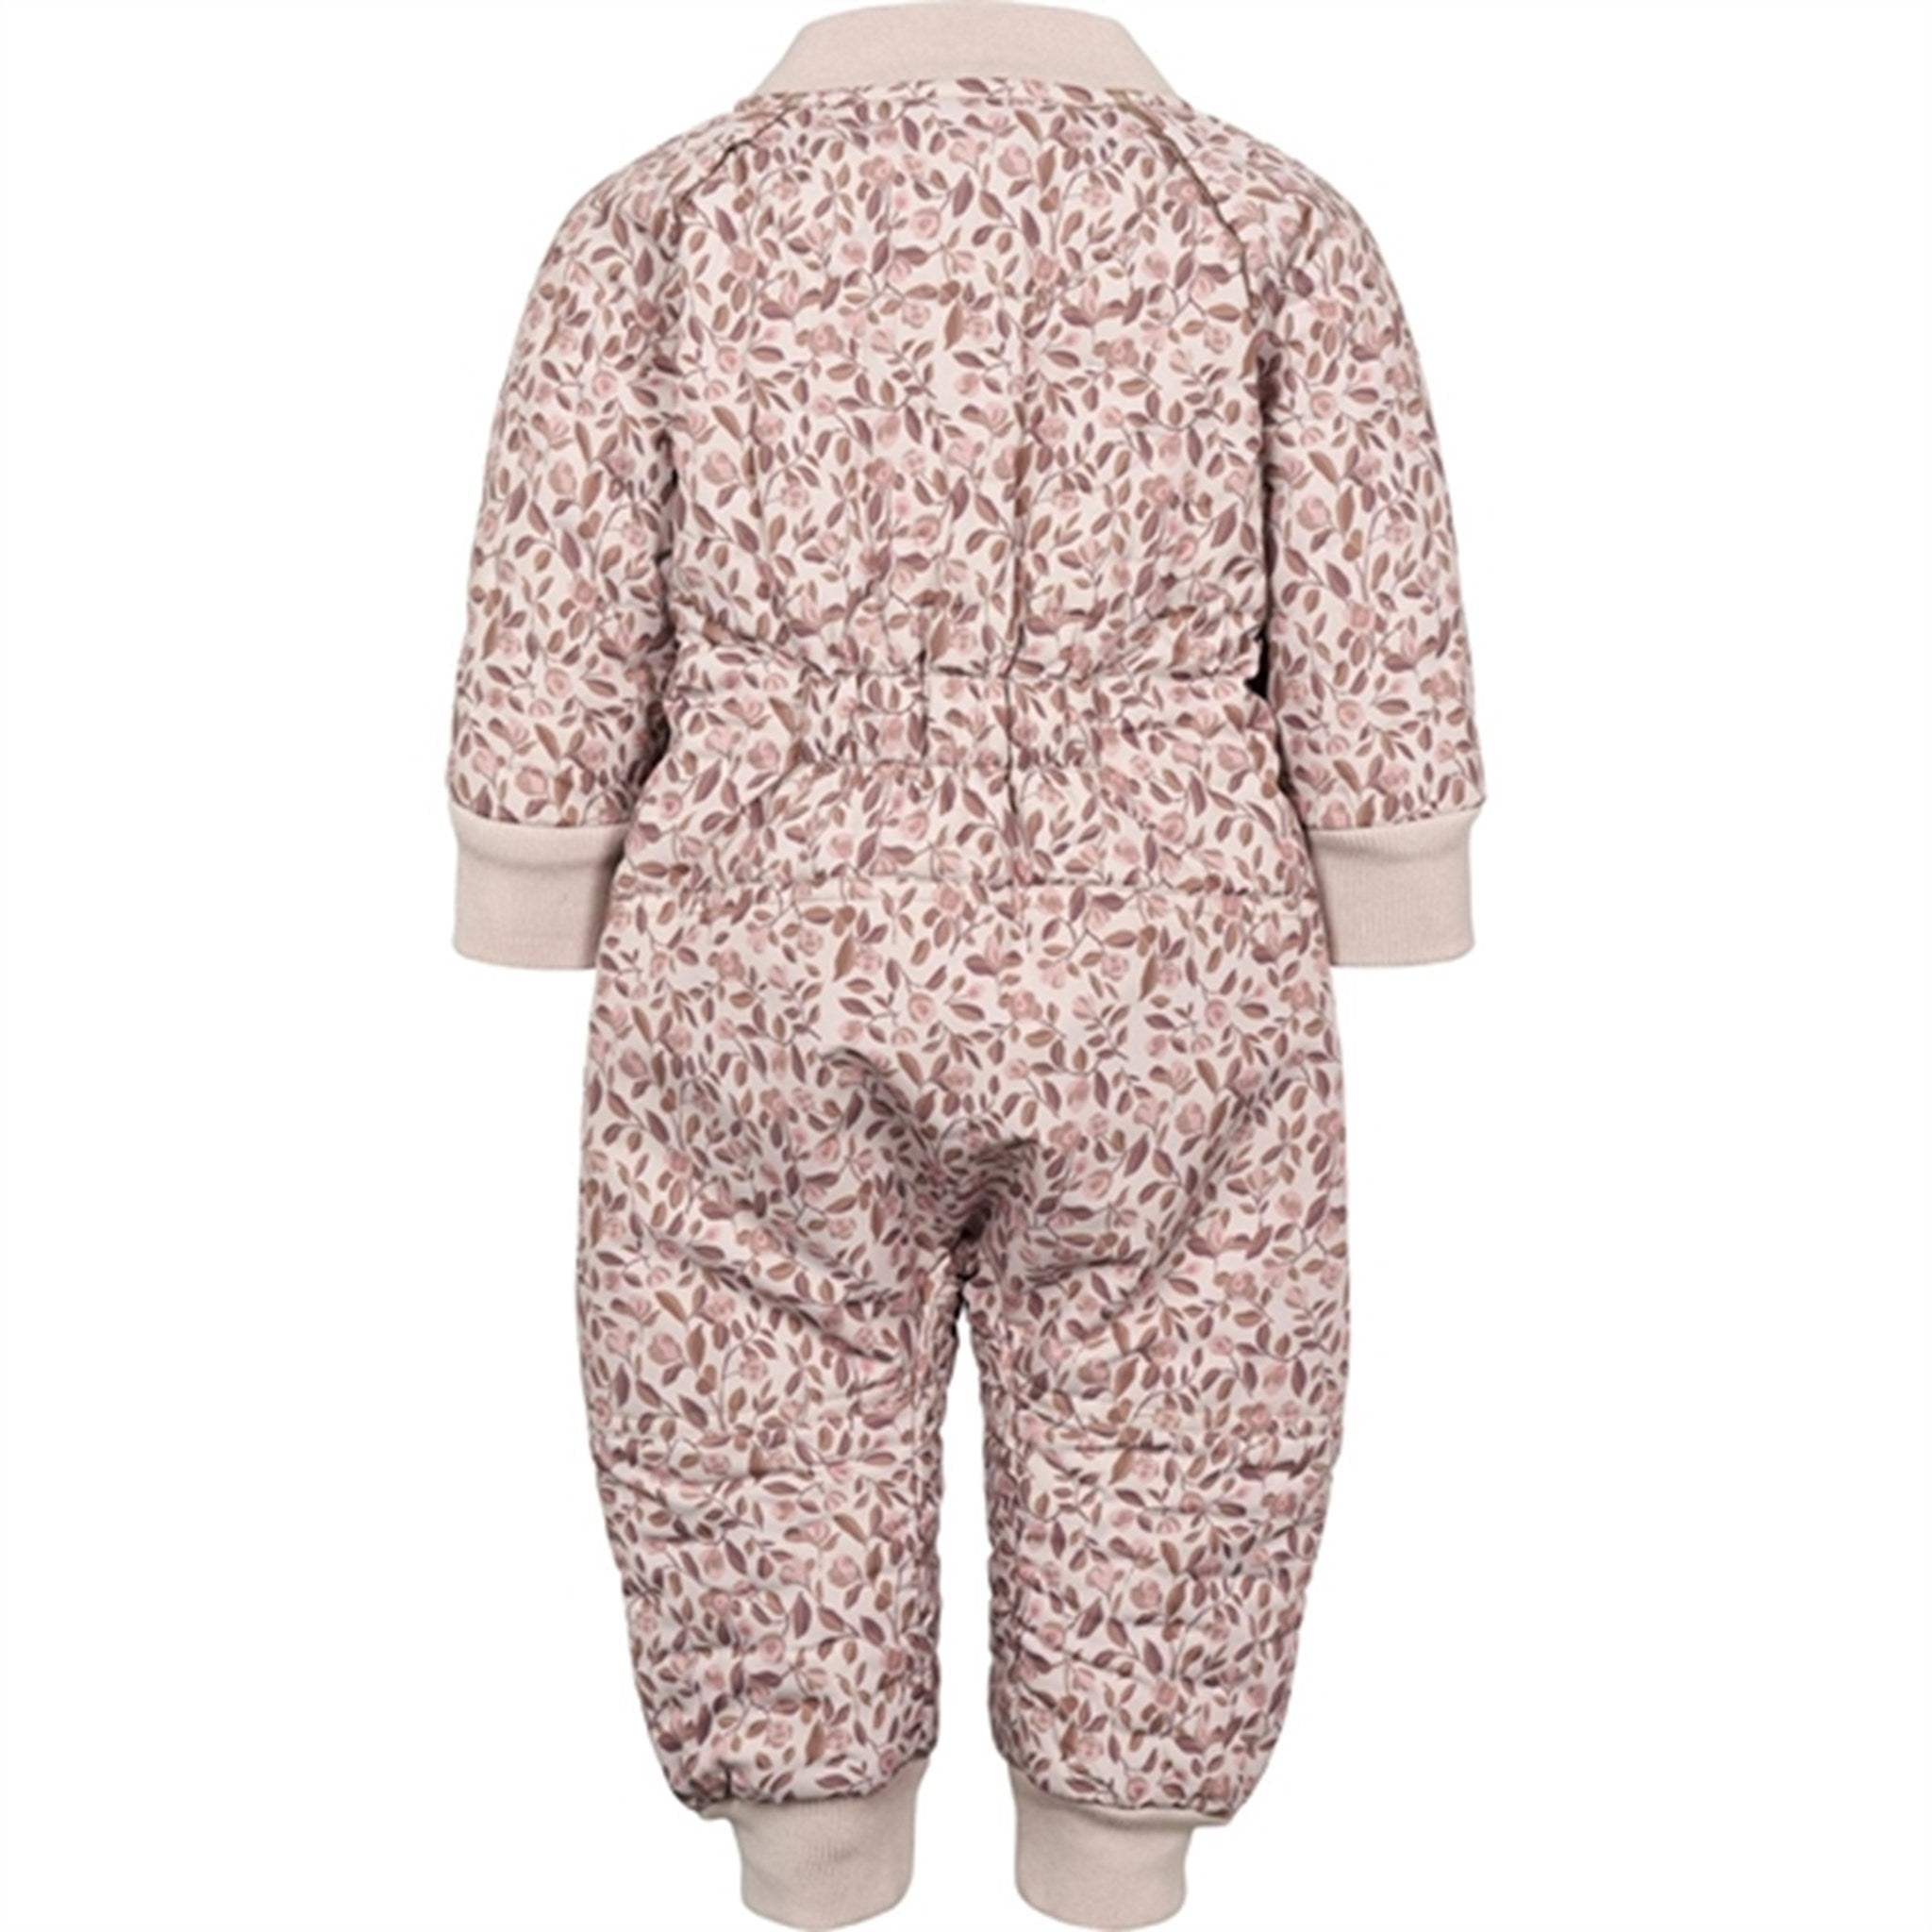 MarMar Blossom Oza Thermo Suit 2